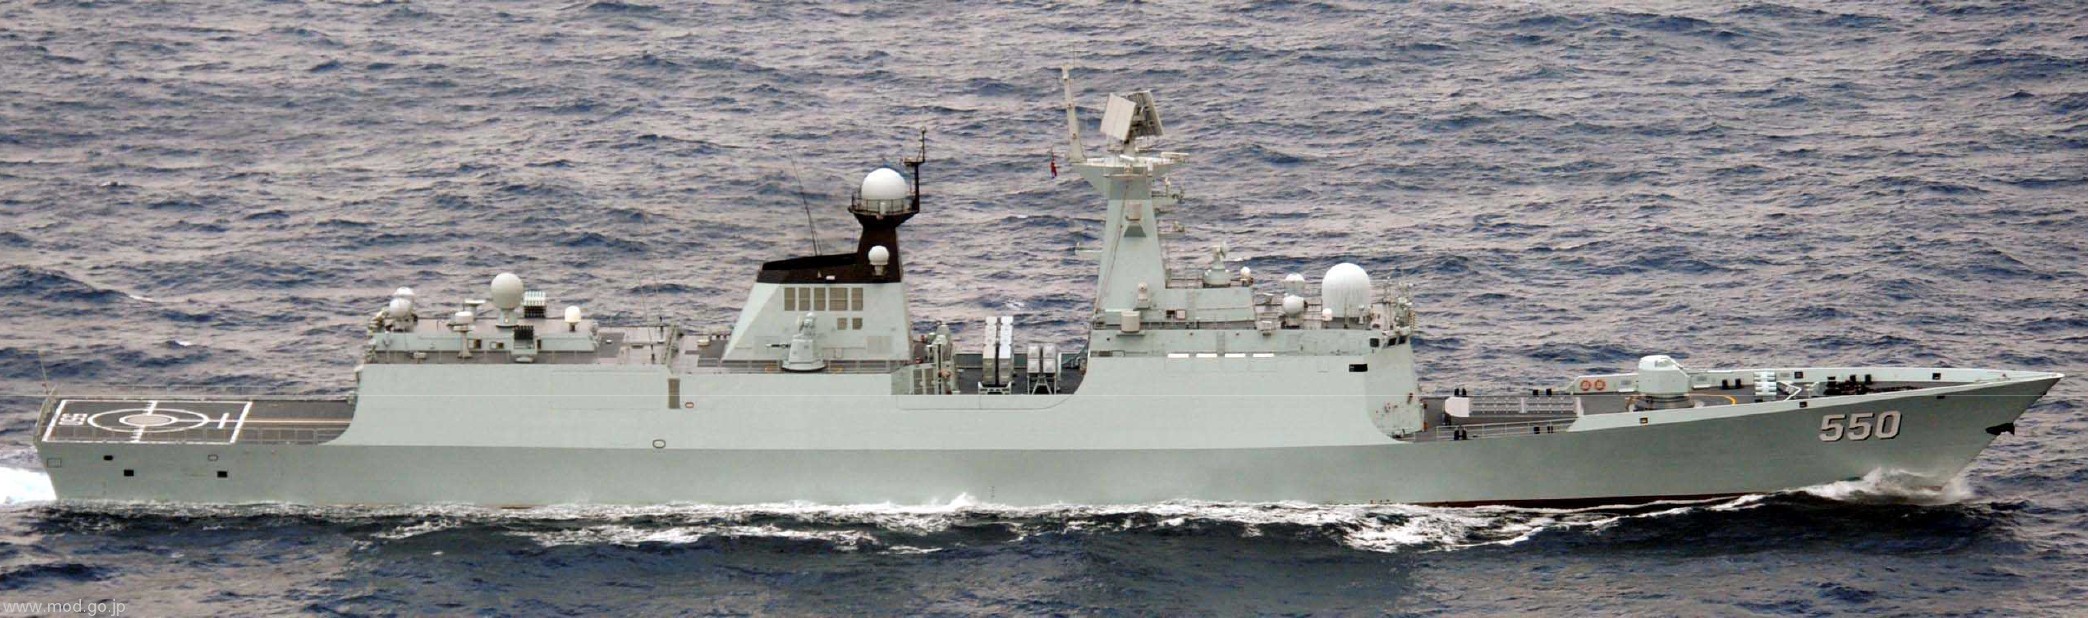 ffg-550 plans weifang type 054a jiangkai ii class guided missile frigate china people's liberation army navy 03